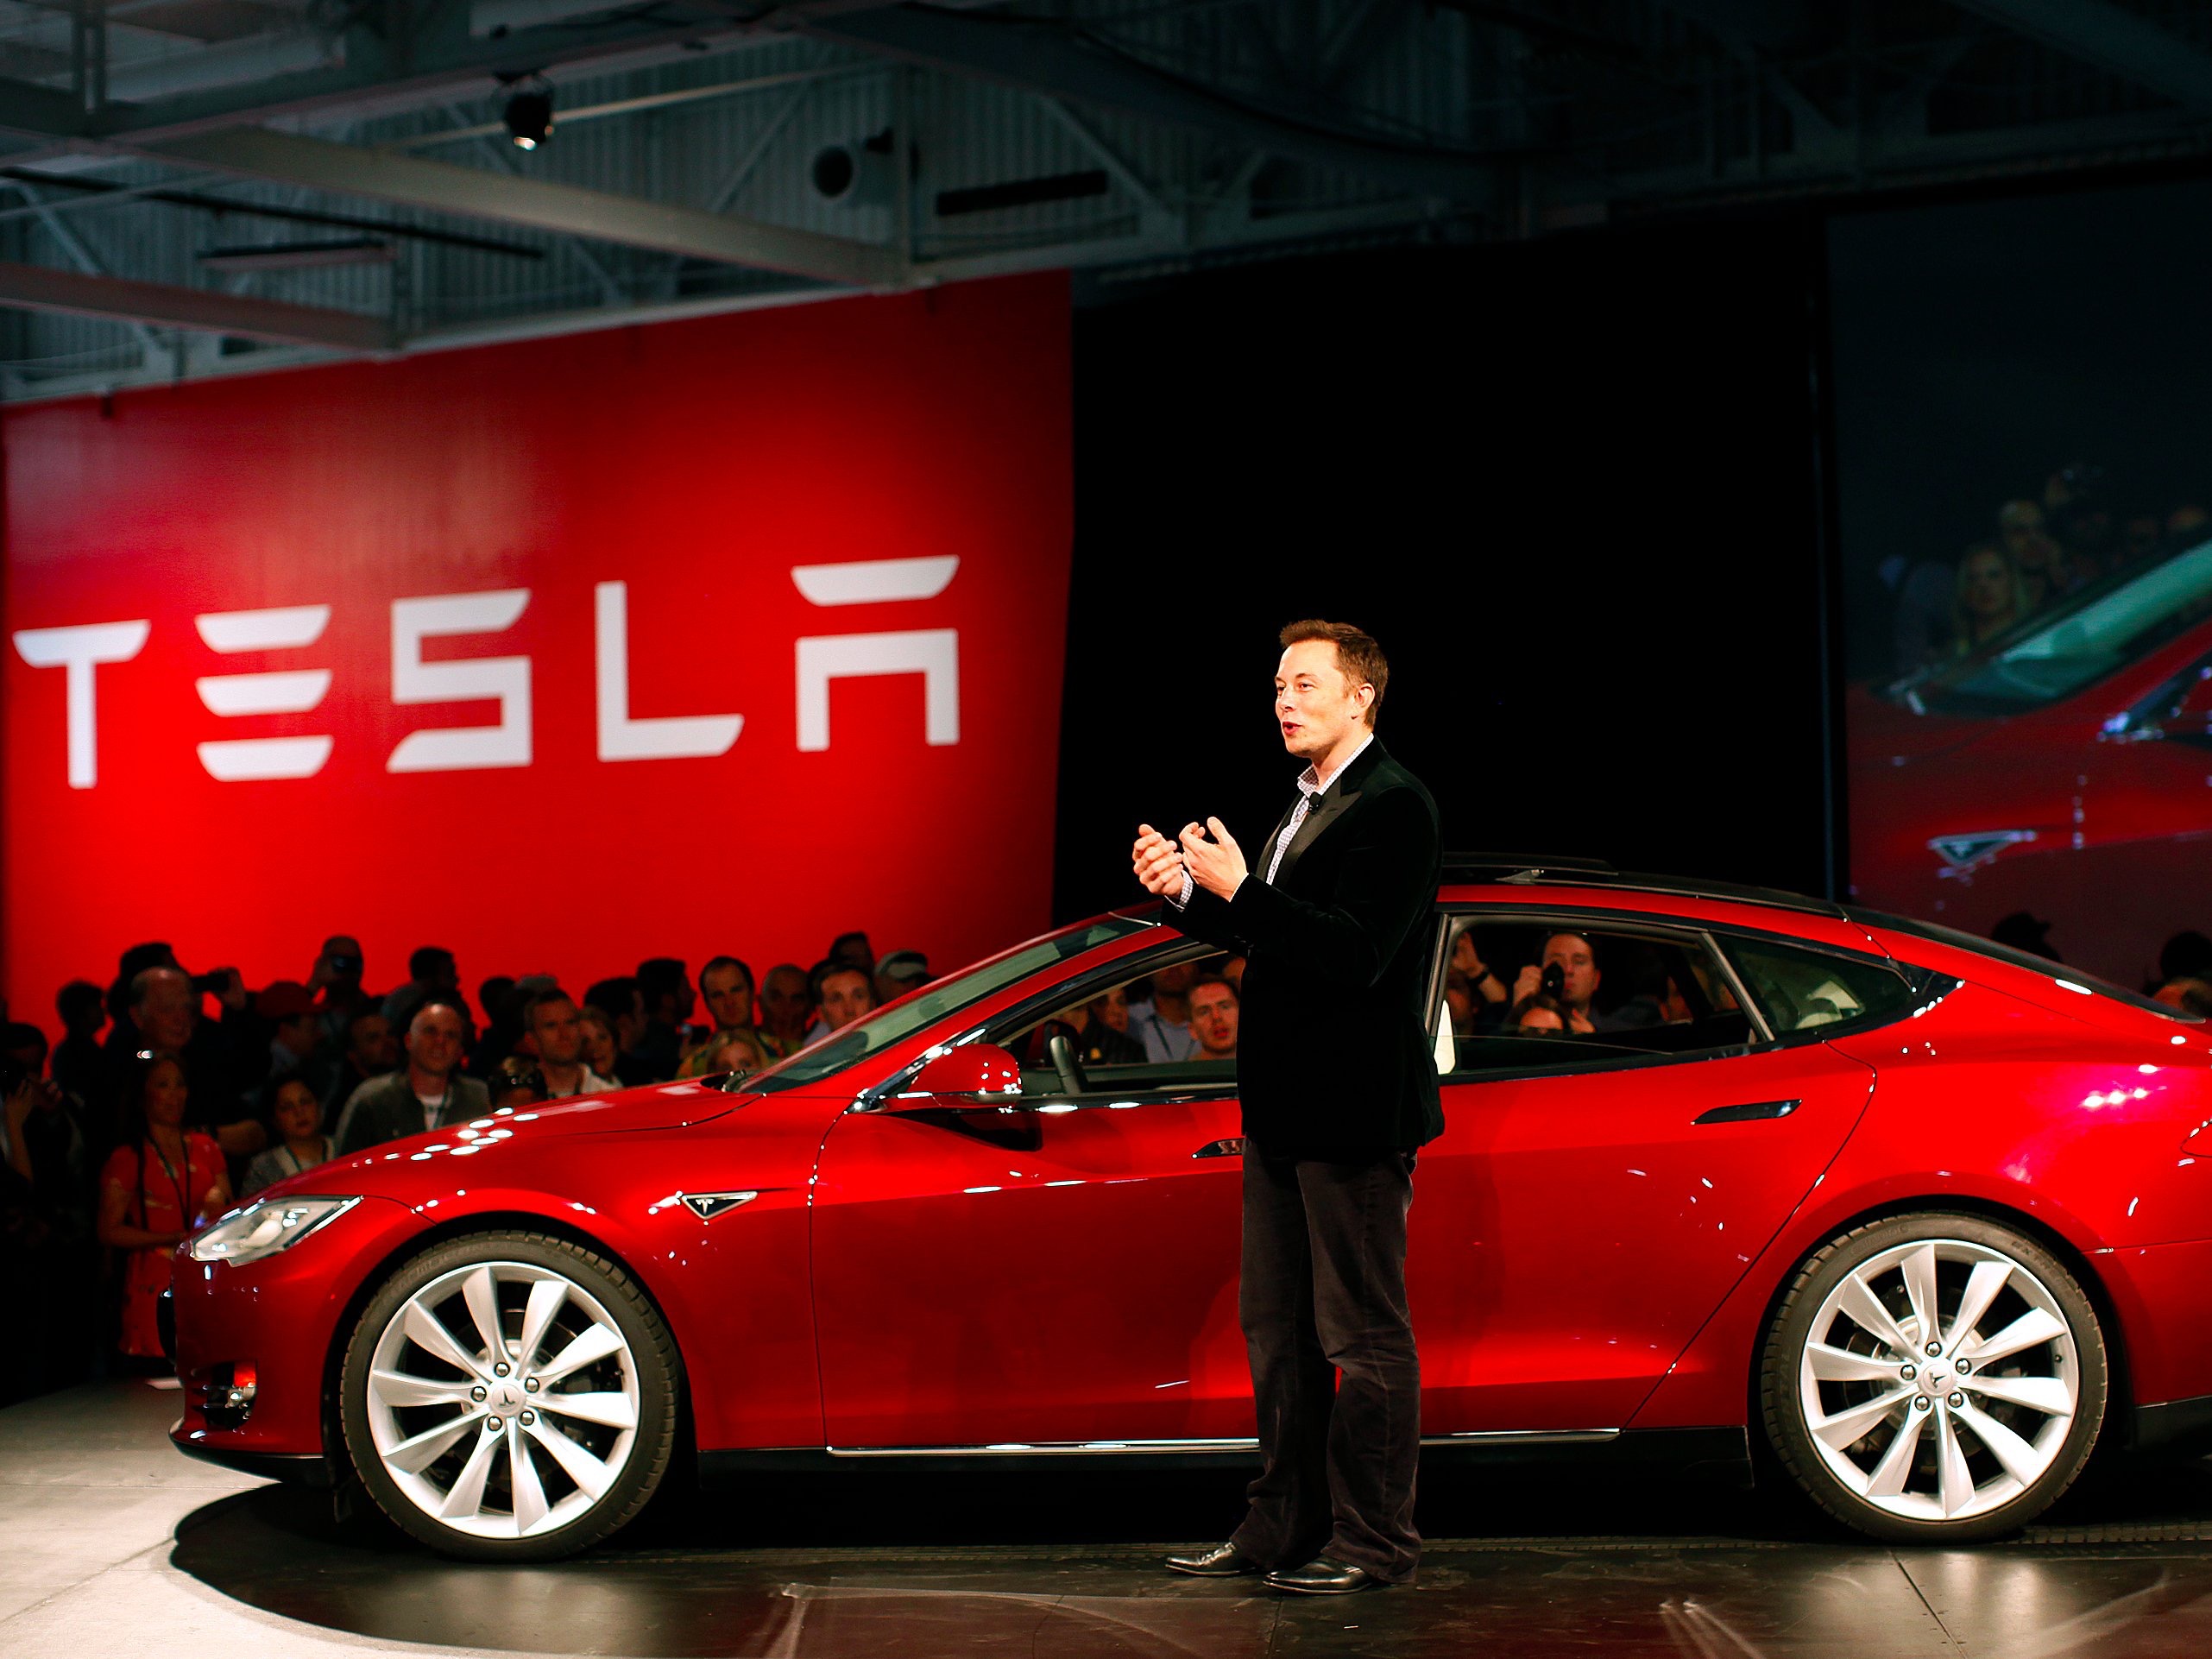 Elon Musk at the Model 3 launch (Photo by Tech Insider)